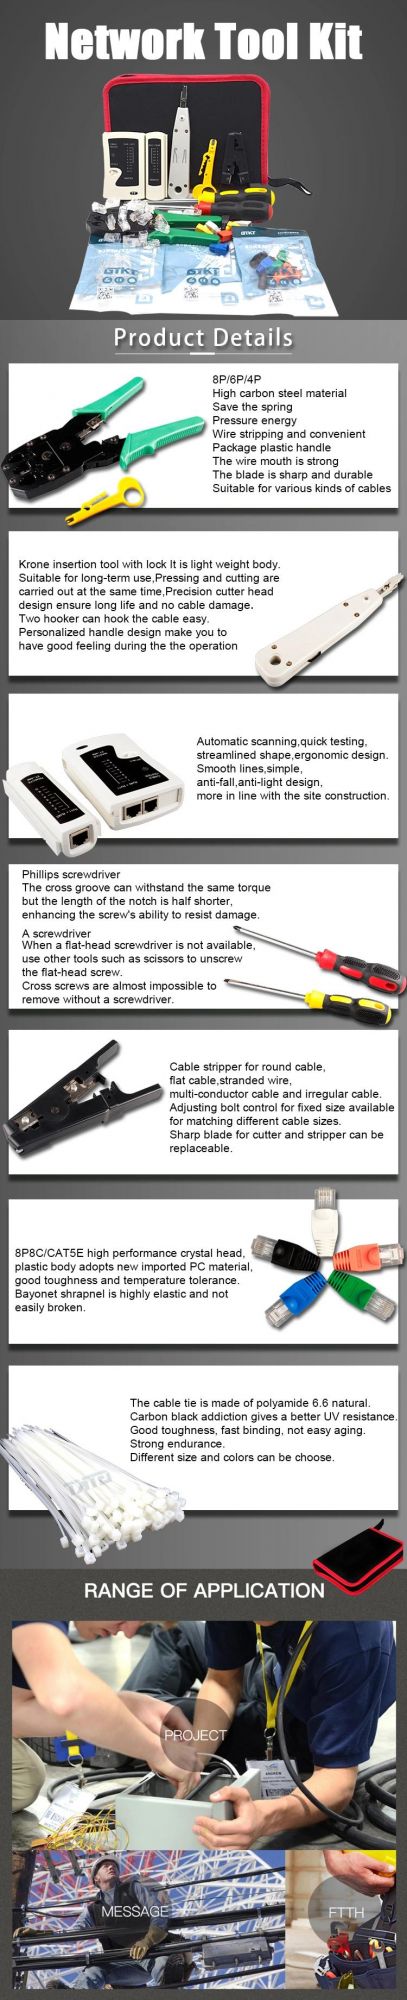 Gcabling LAN Tester Krone Insertion Tool Hand Crimping Cat5e CAT6 Ethernet Cable Network Tools Kit